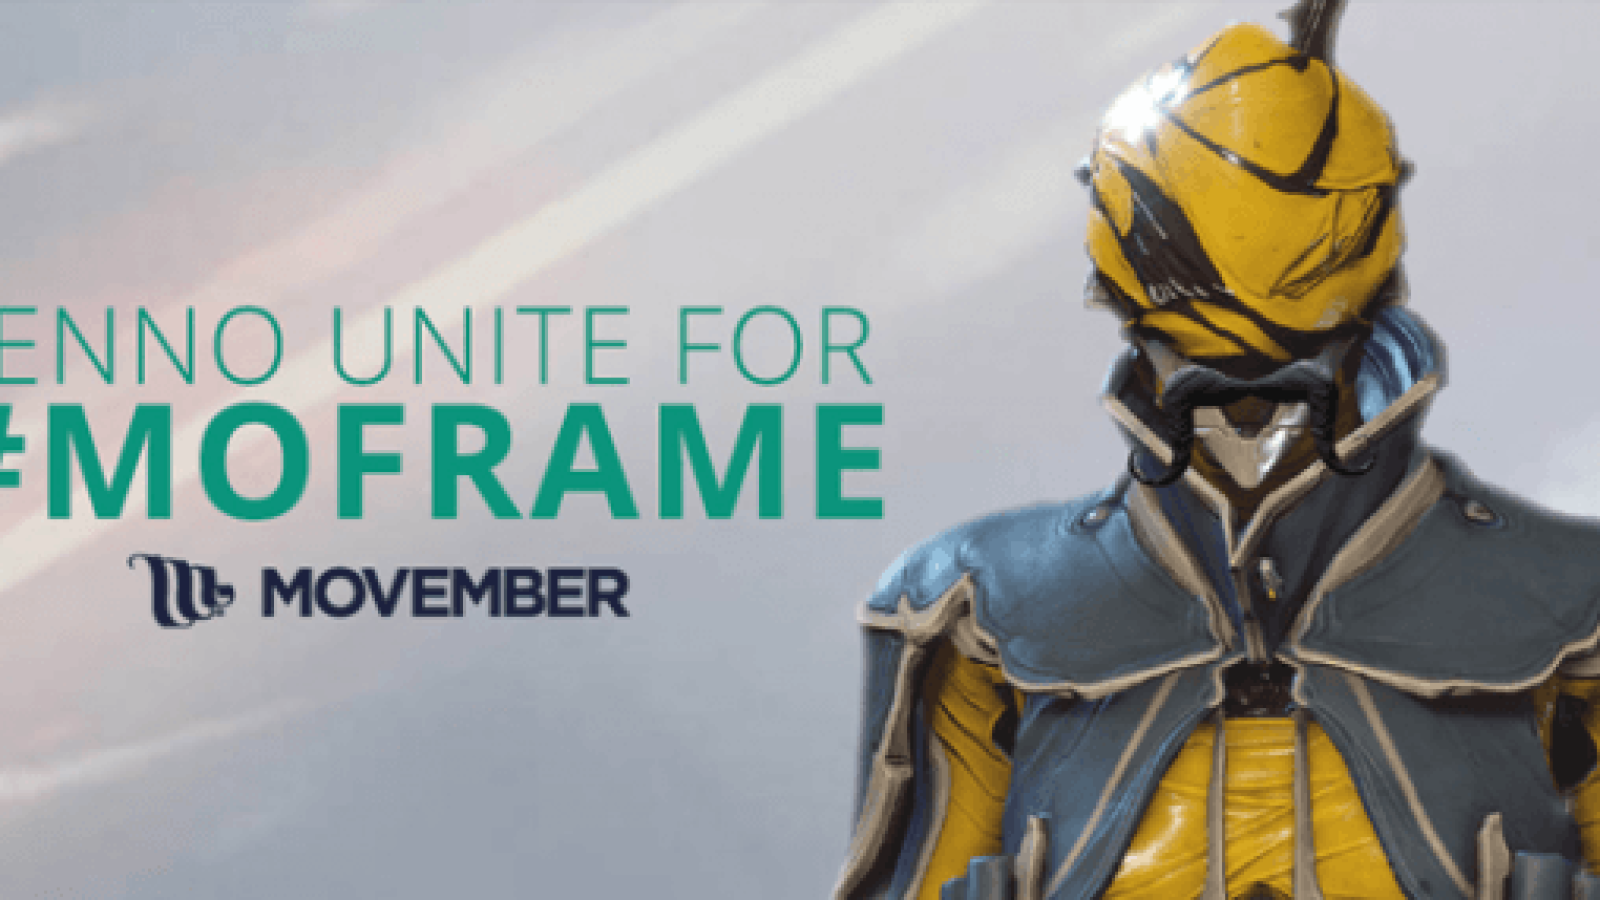 THE STACHE IS BACK – BECOME A MO BRO IN WARFRAME